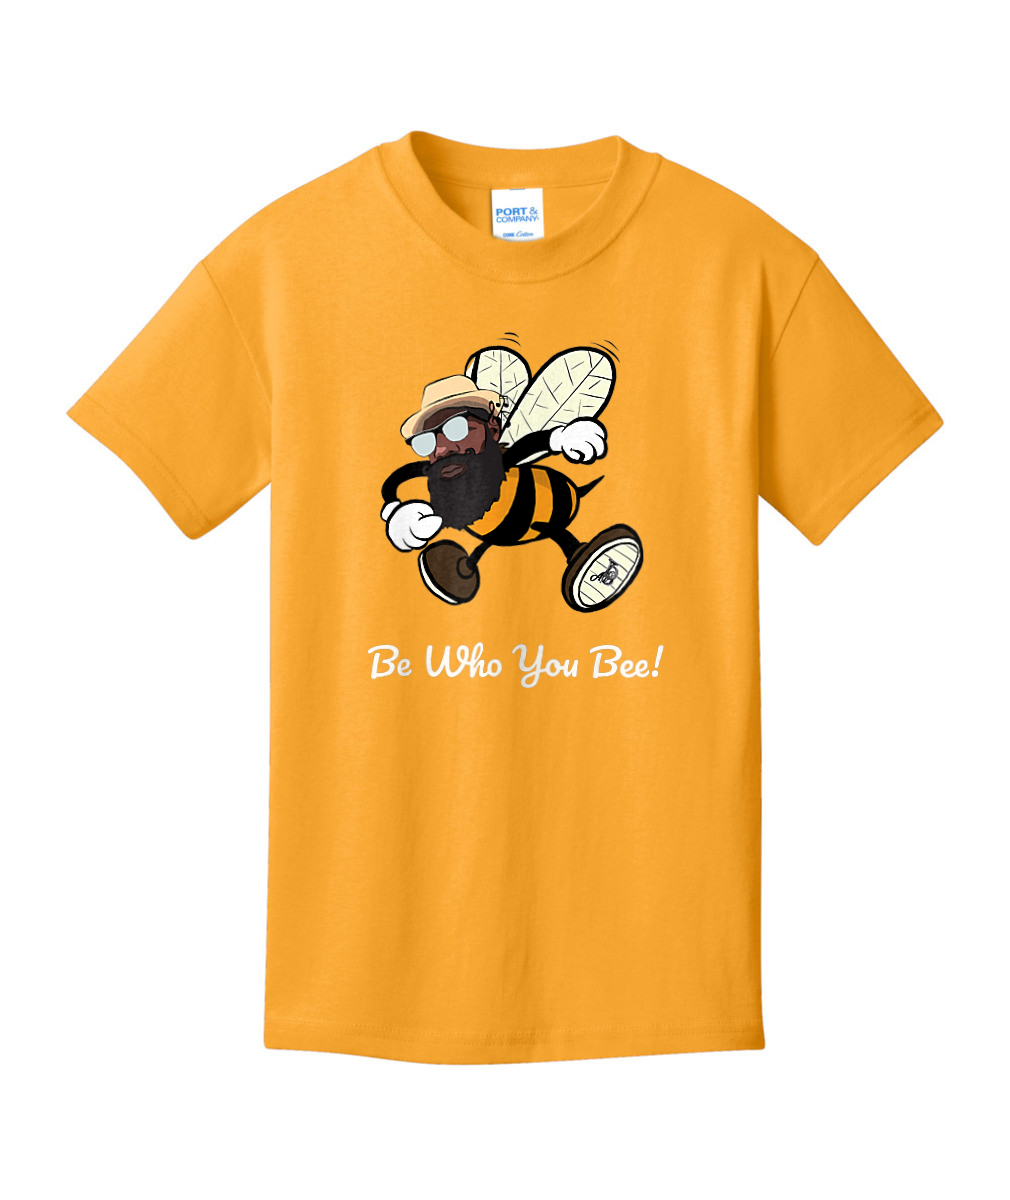 Be Who You Bee Youth Core Cotton Tee or Similar